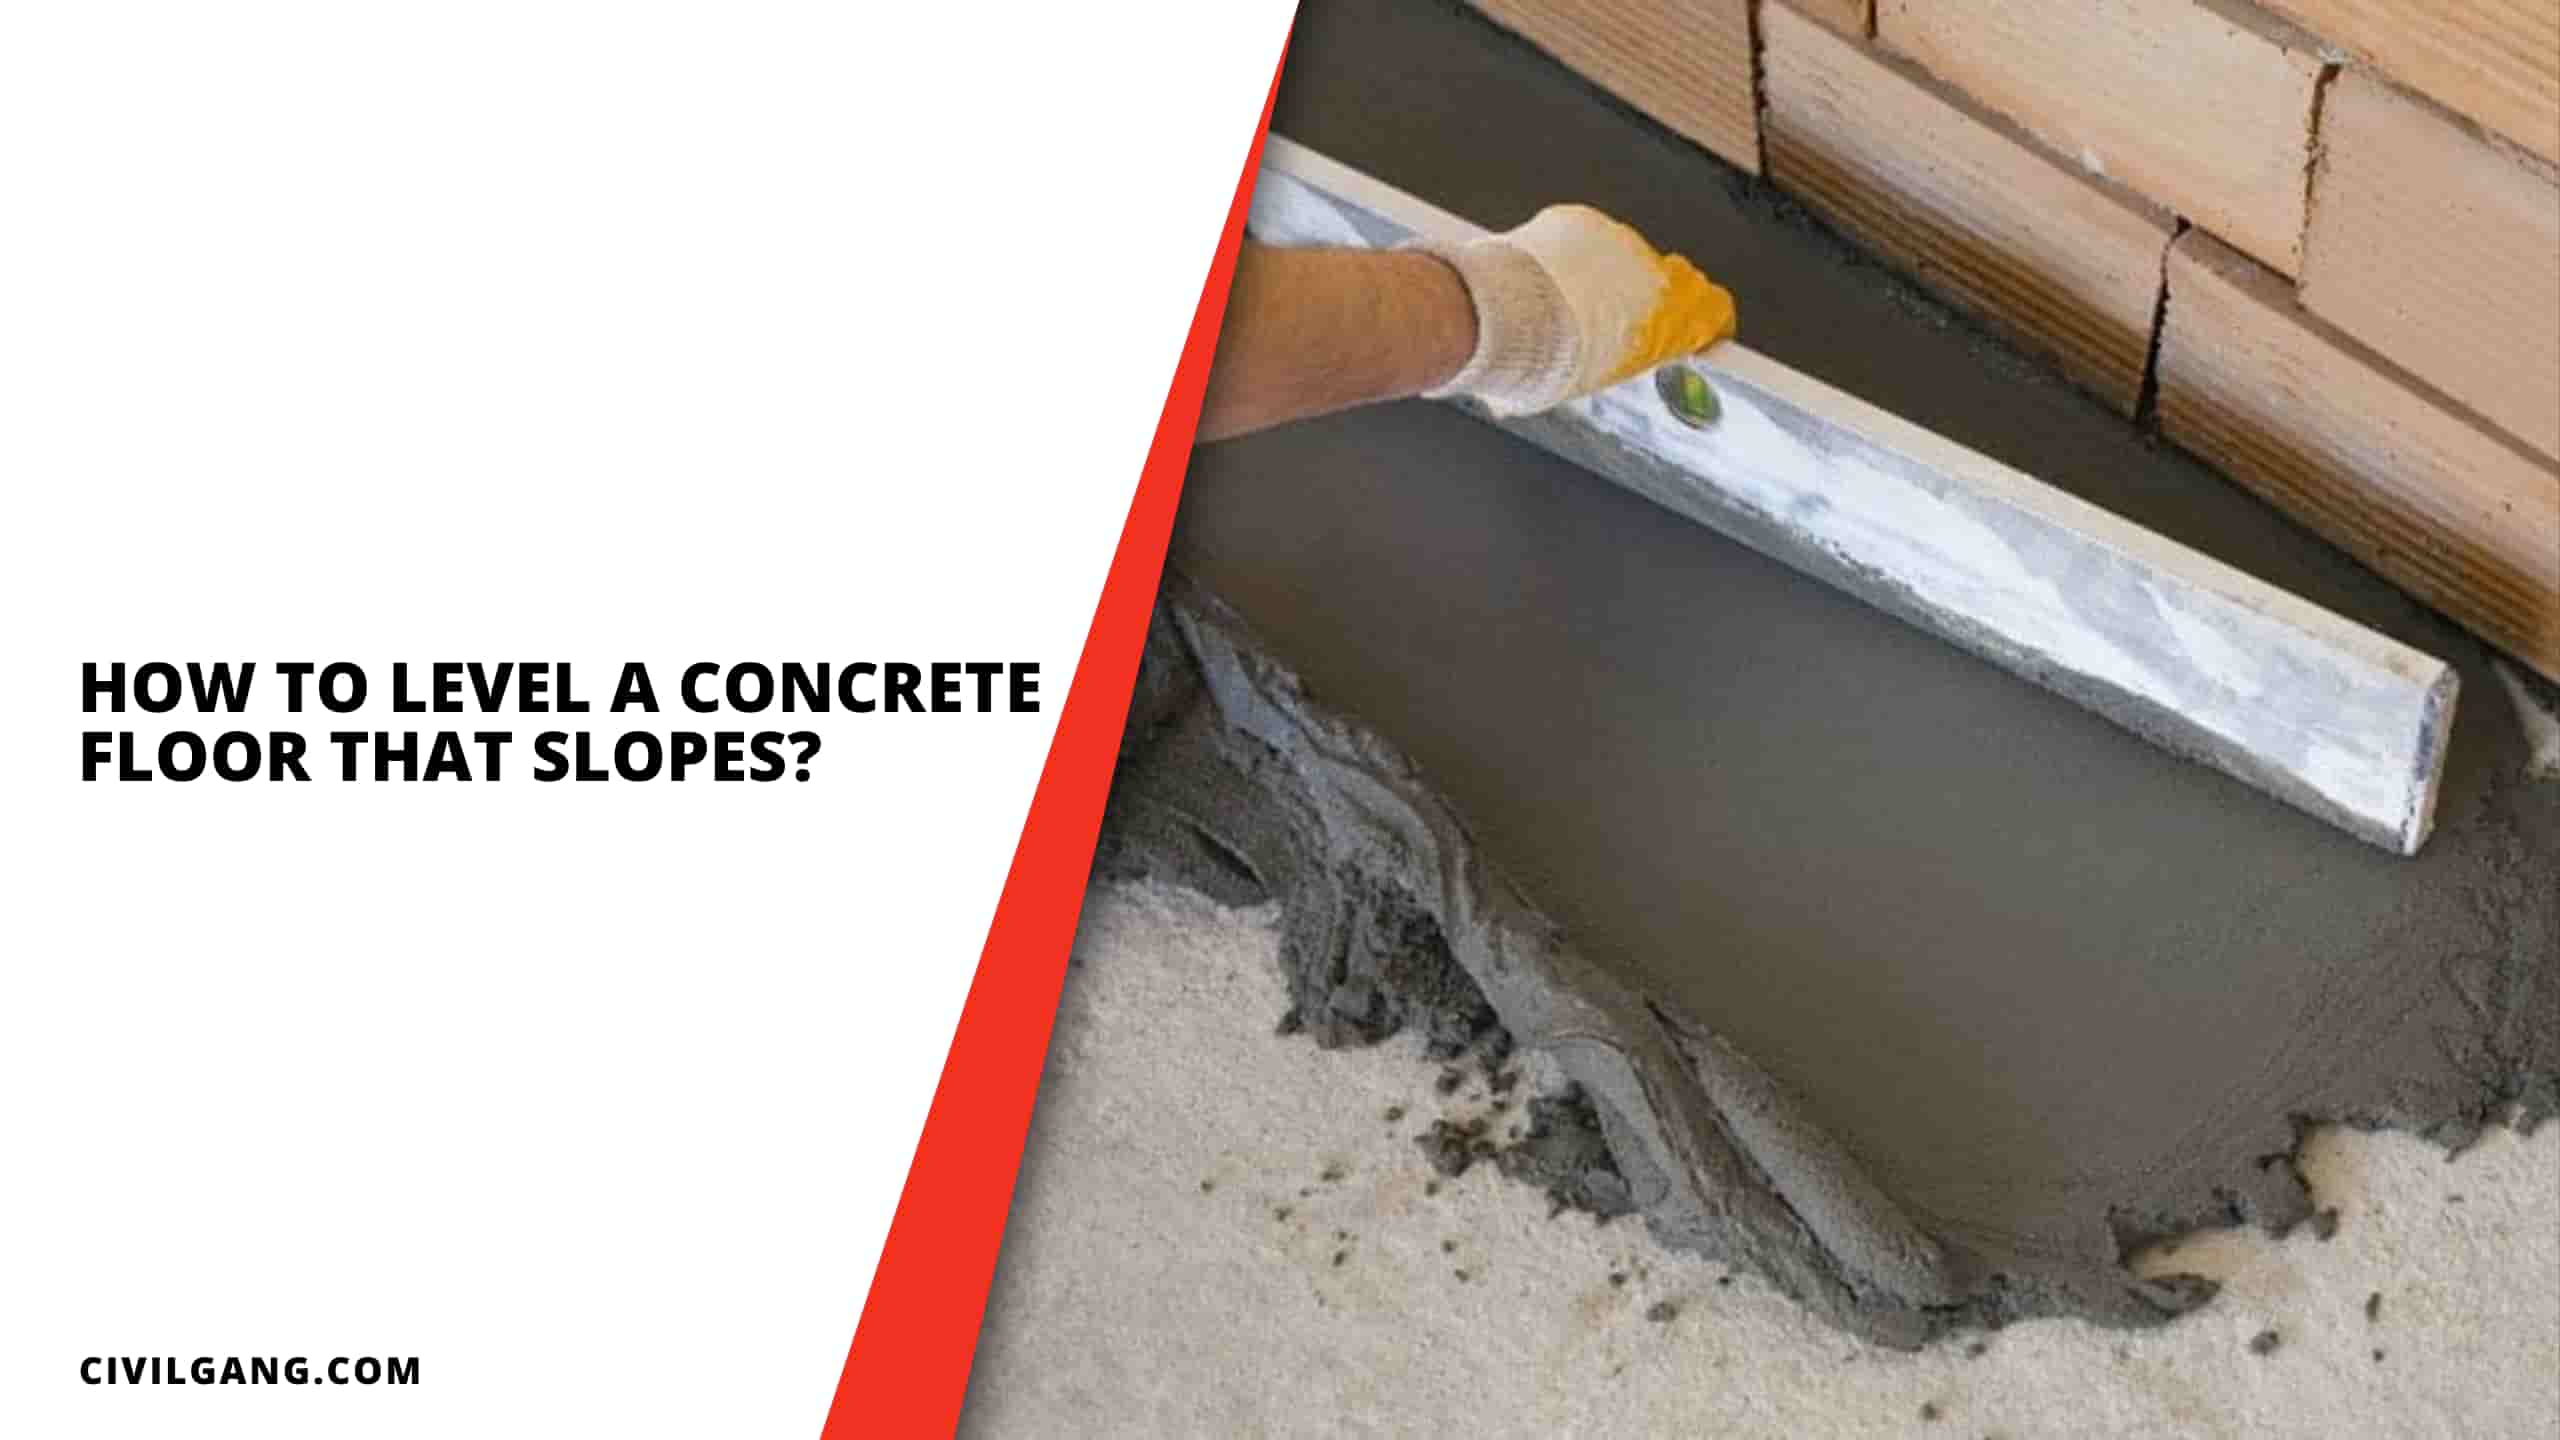 How to Level a Concrete Floor That Slopes?